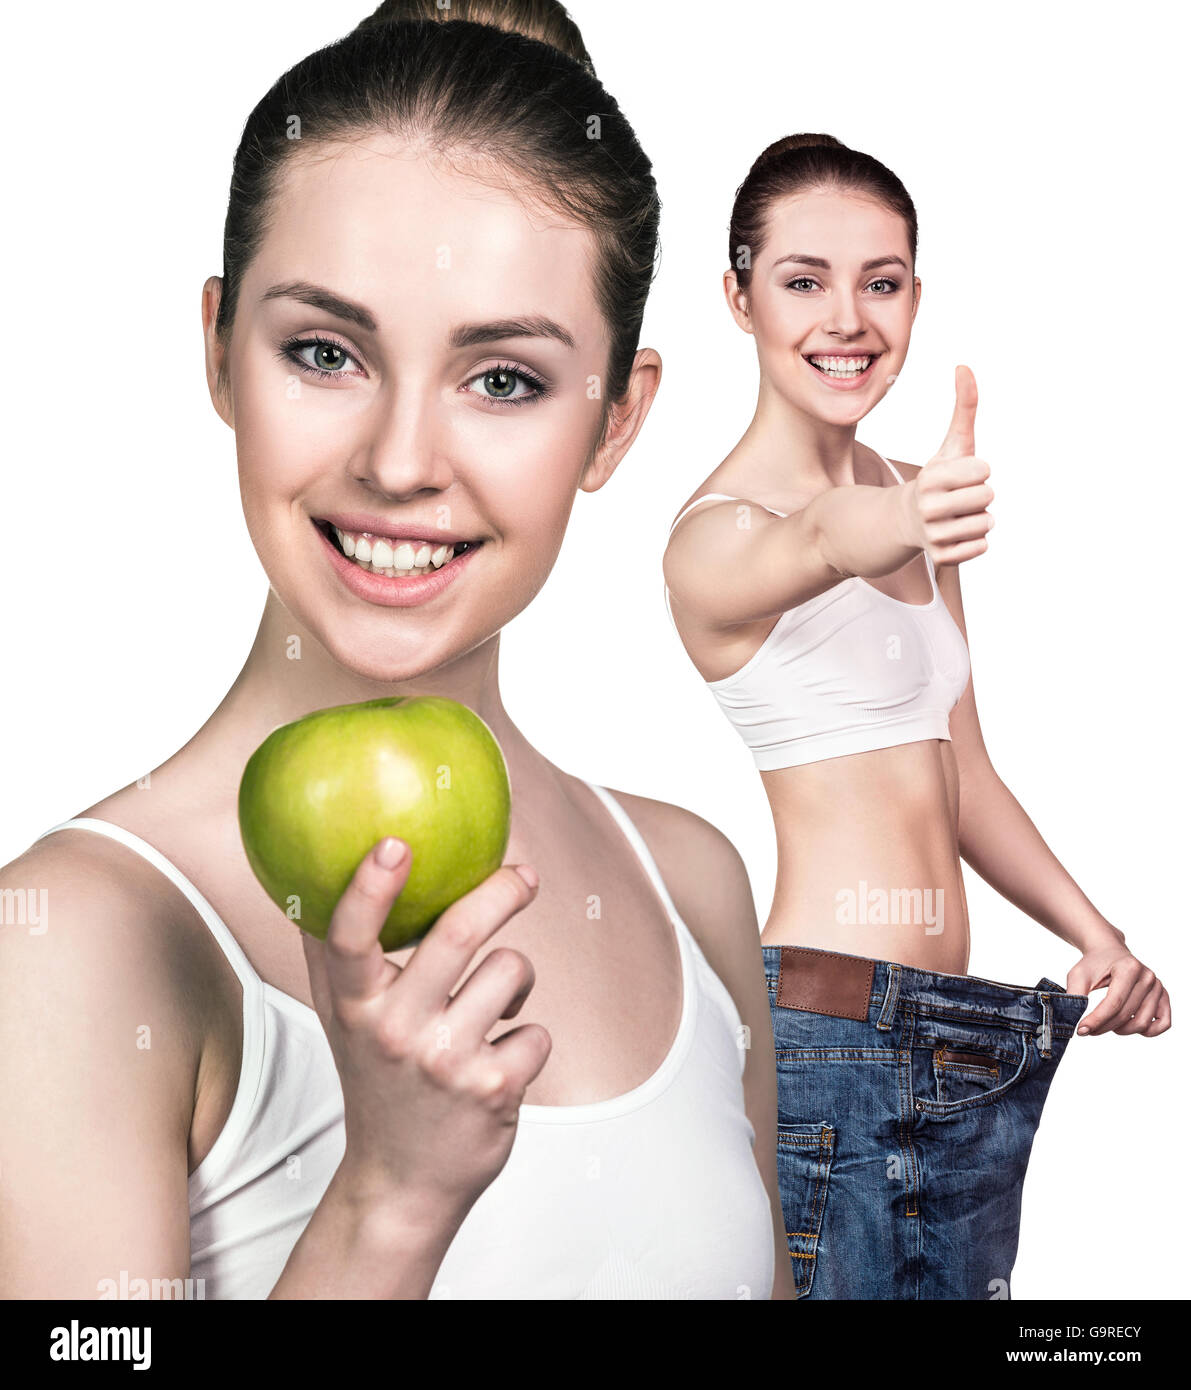 Young woman showing weight loss result Stock Photo